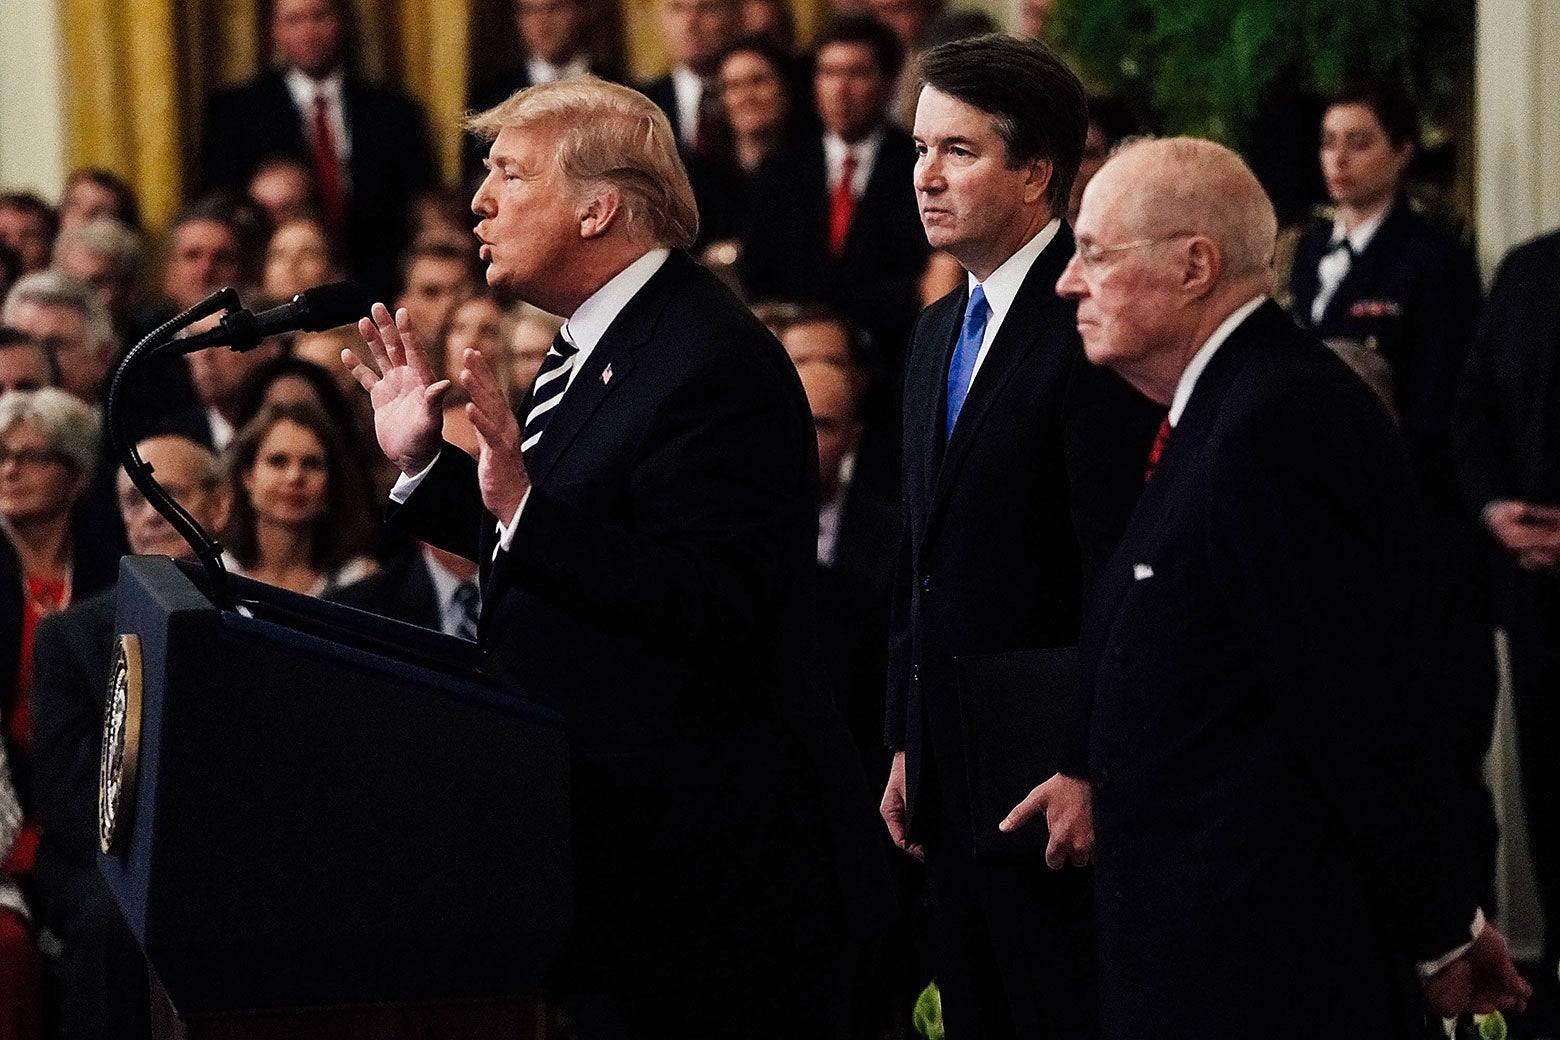 President Donald Trump speaks as Supreme Court Justice Brett Kavanaugh and retired Justice Anthony Kennedy look on during Kavanaugh's ceremonial swearing-in at the East Room of the White House on Monday.